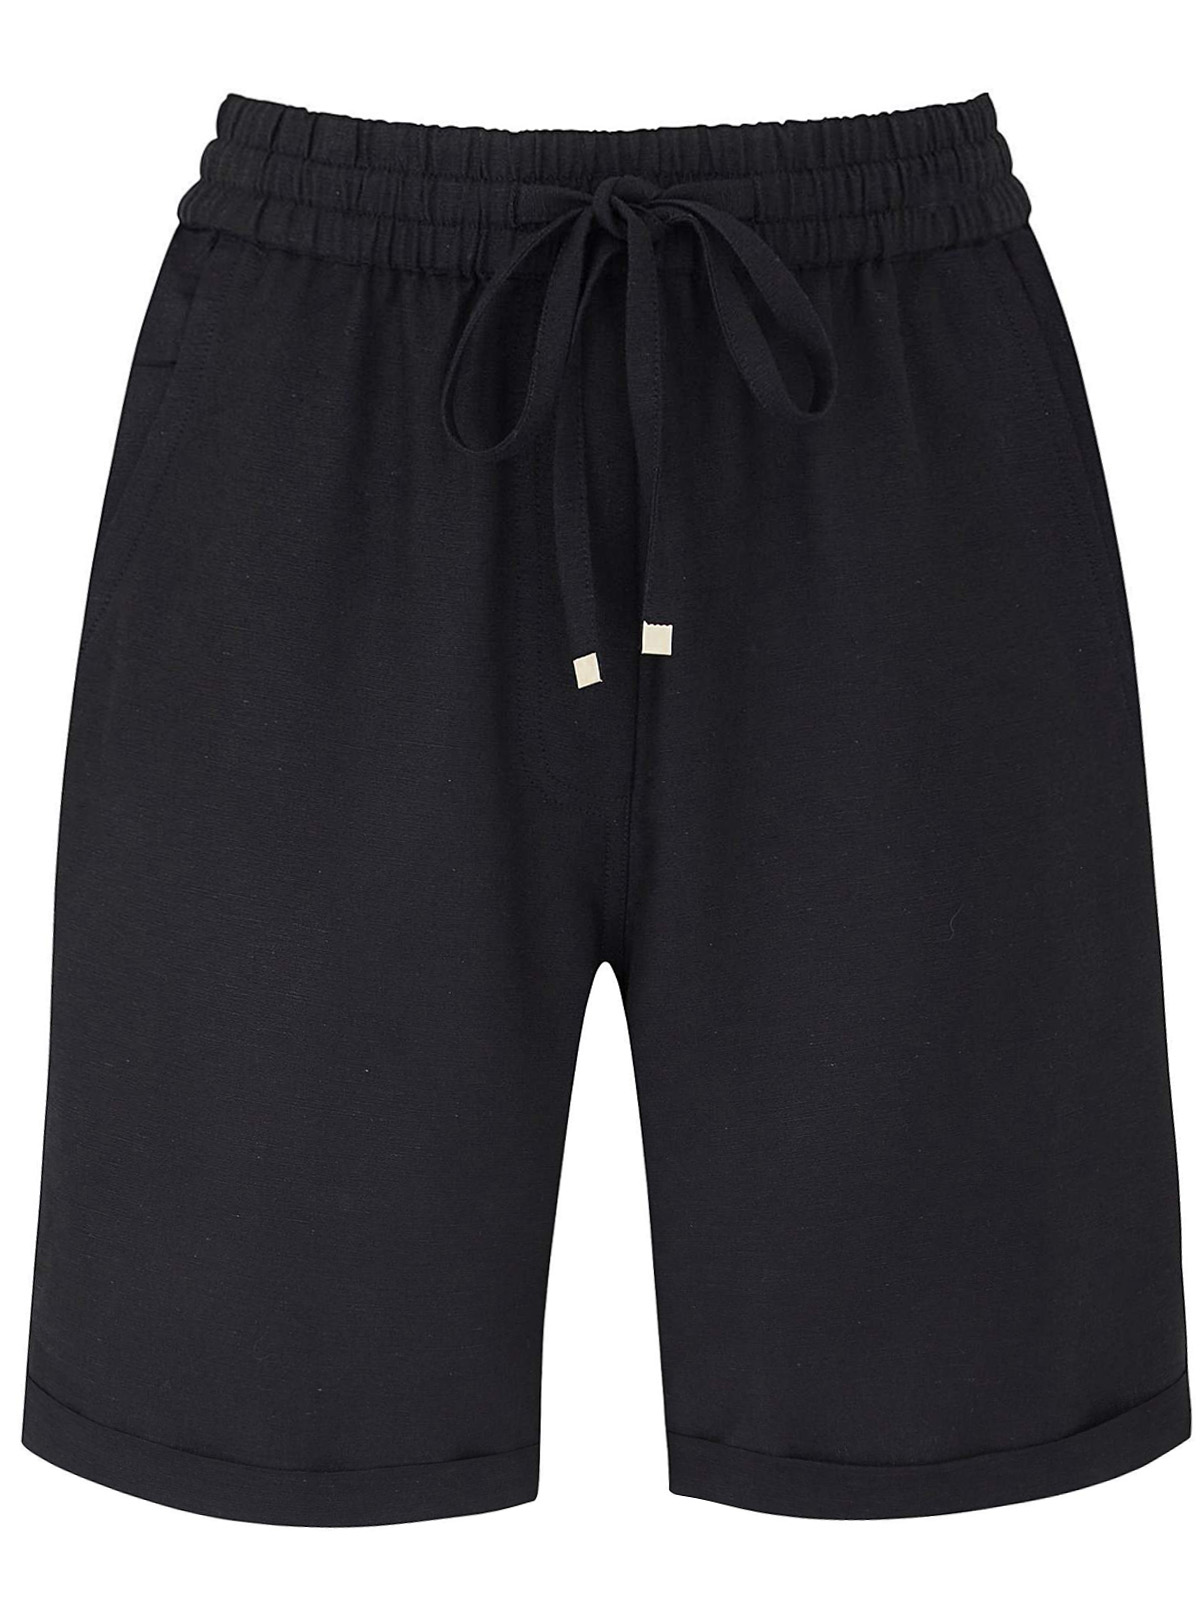 Capsule - - Capsule BLACK Linen Blend Pull On Shorts - Plus Size 16 to 32